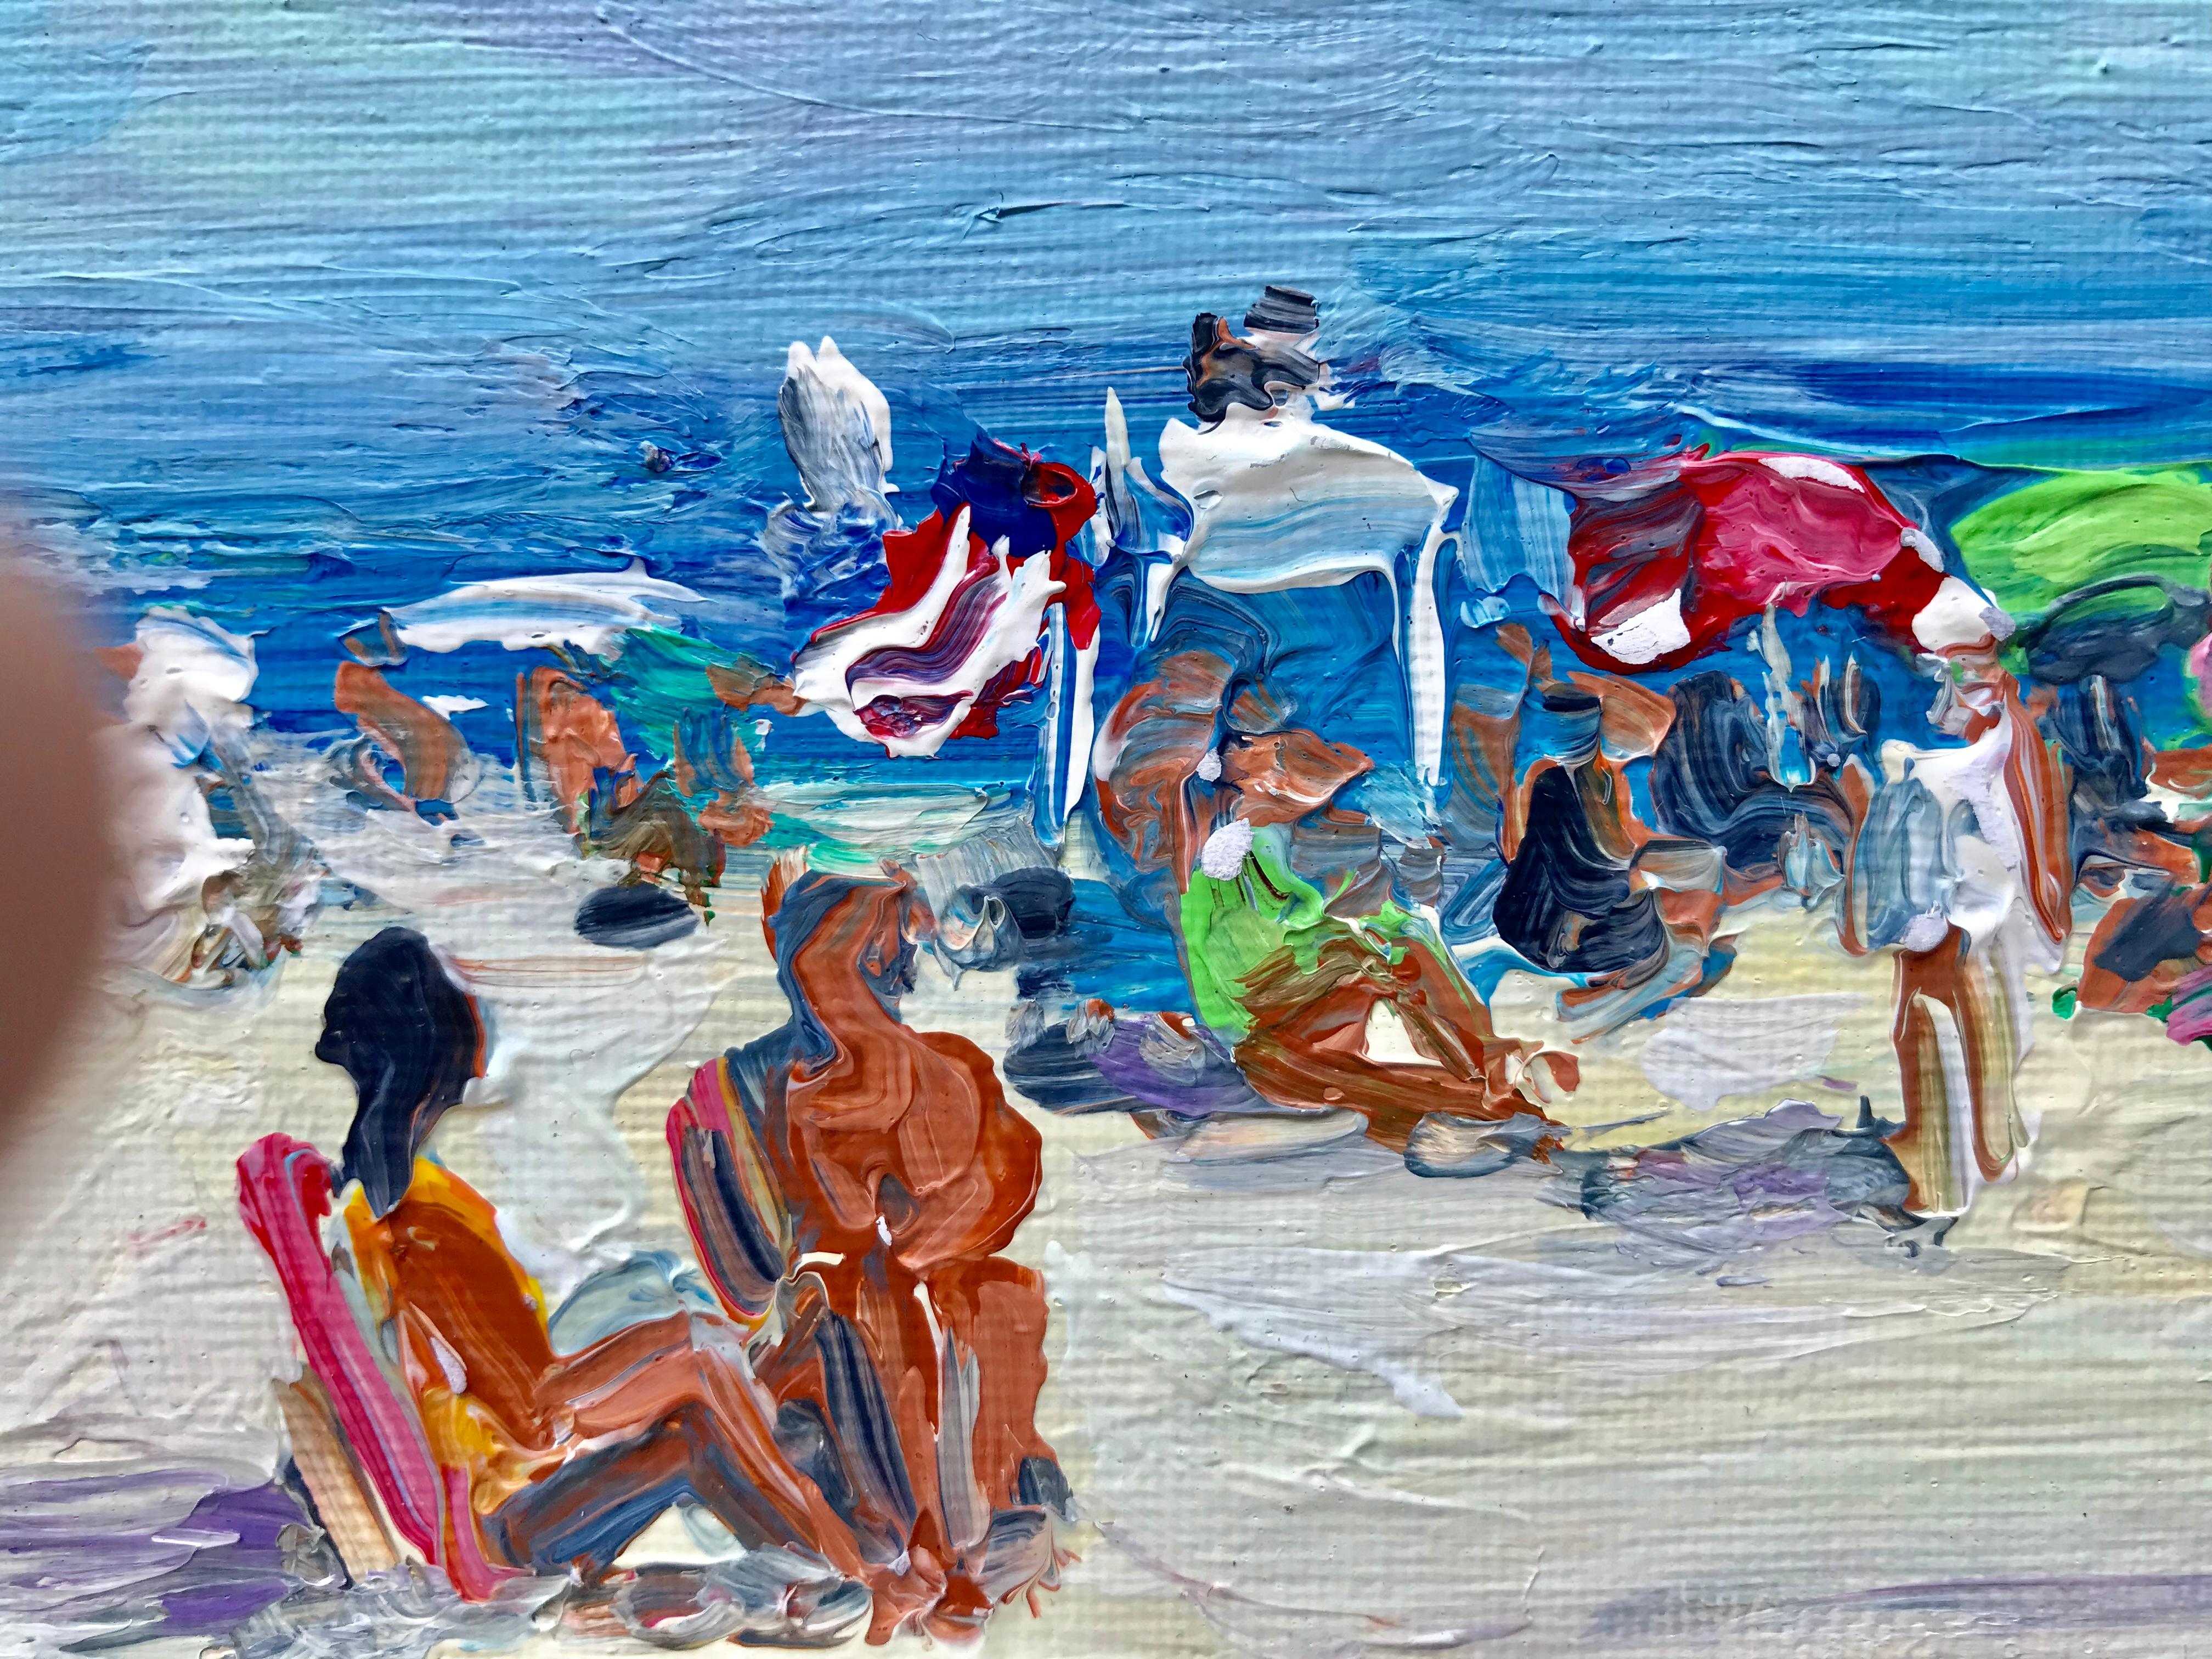 “Beach Day” - Blue Figurative Painting by John Crimmins